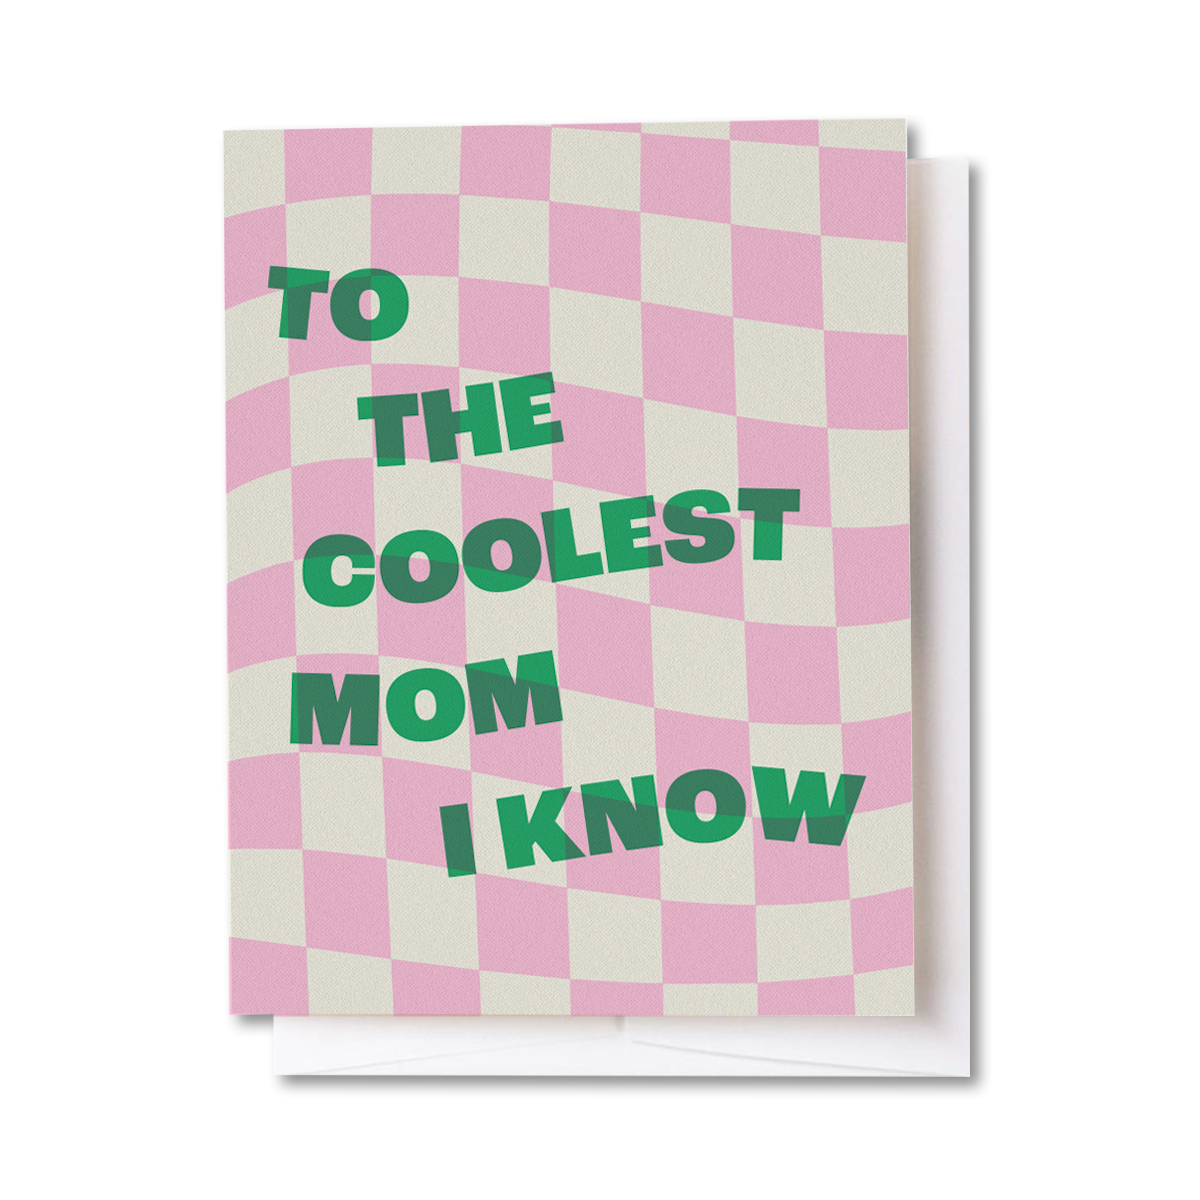 Coolest Mom Checkered Card